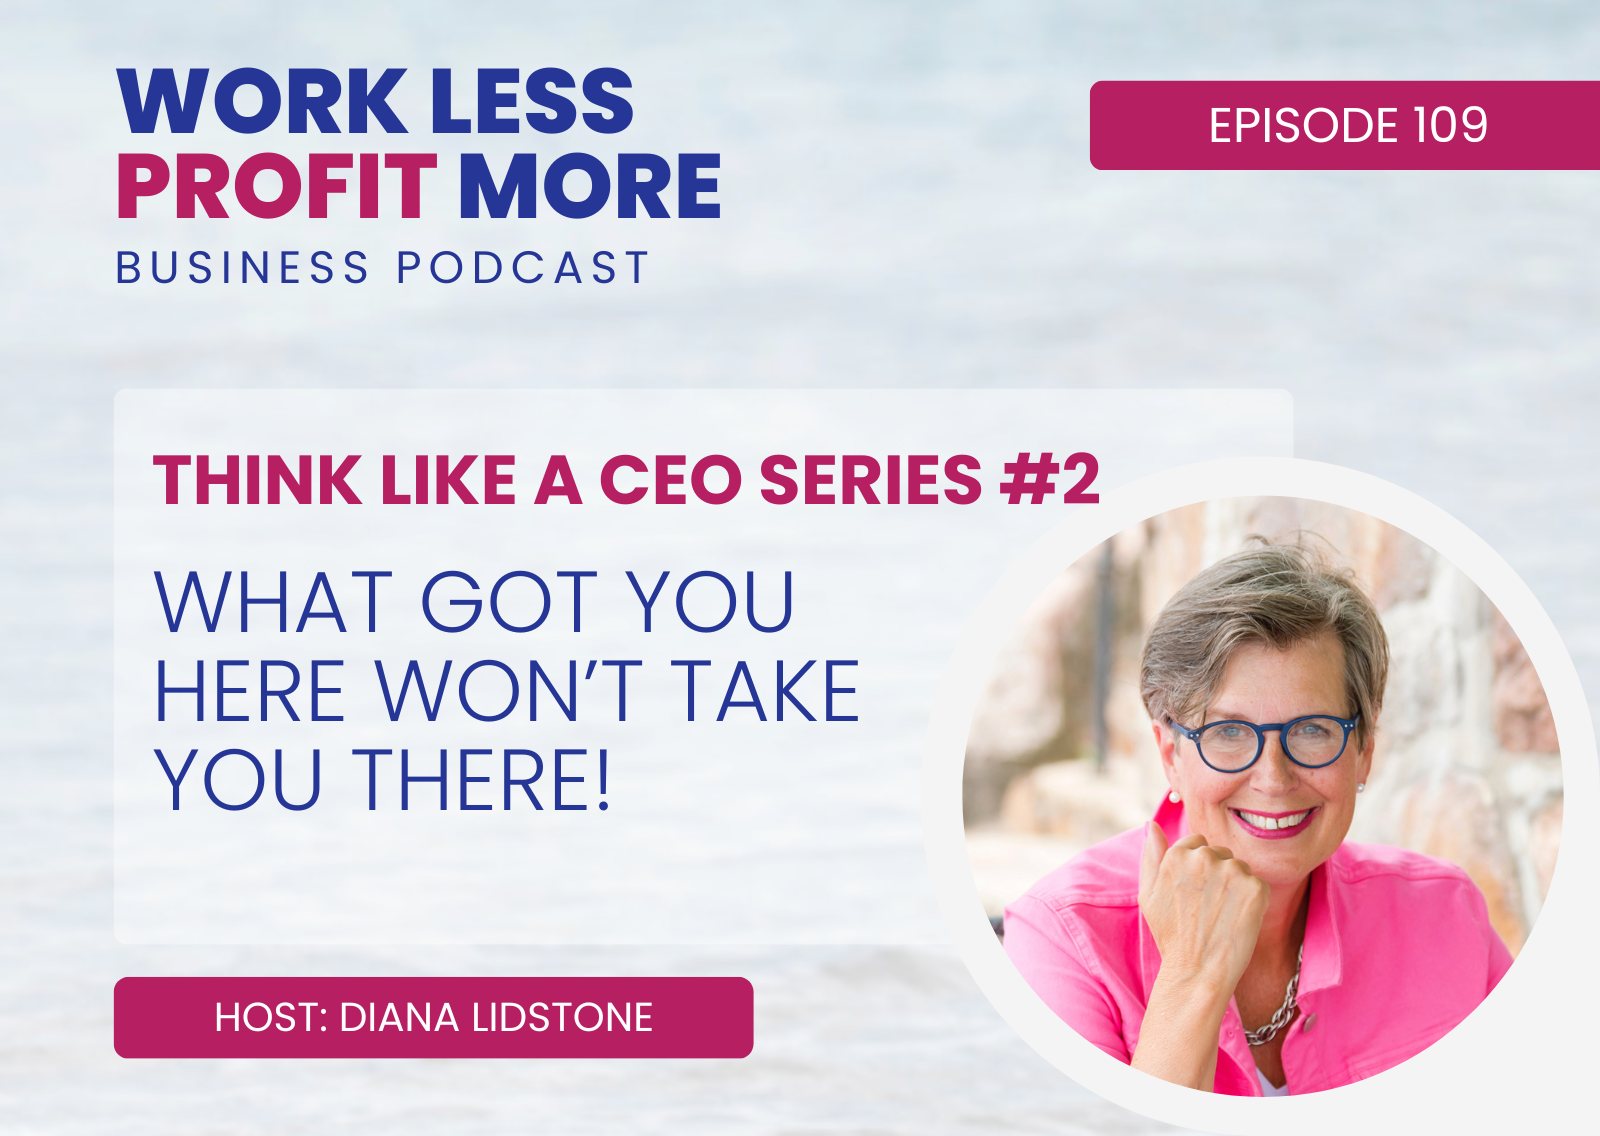 What Got You Here Won’t Take You There! (THINK LIKE A CEO series #2)